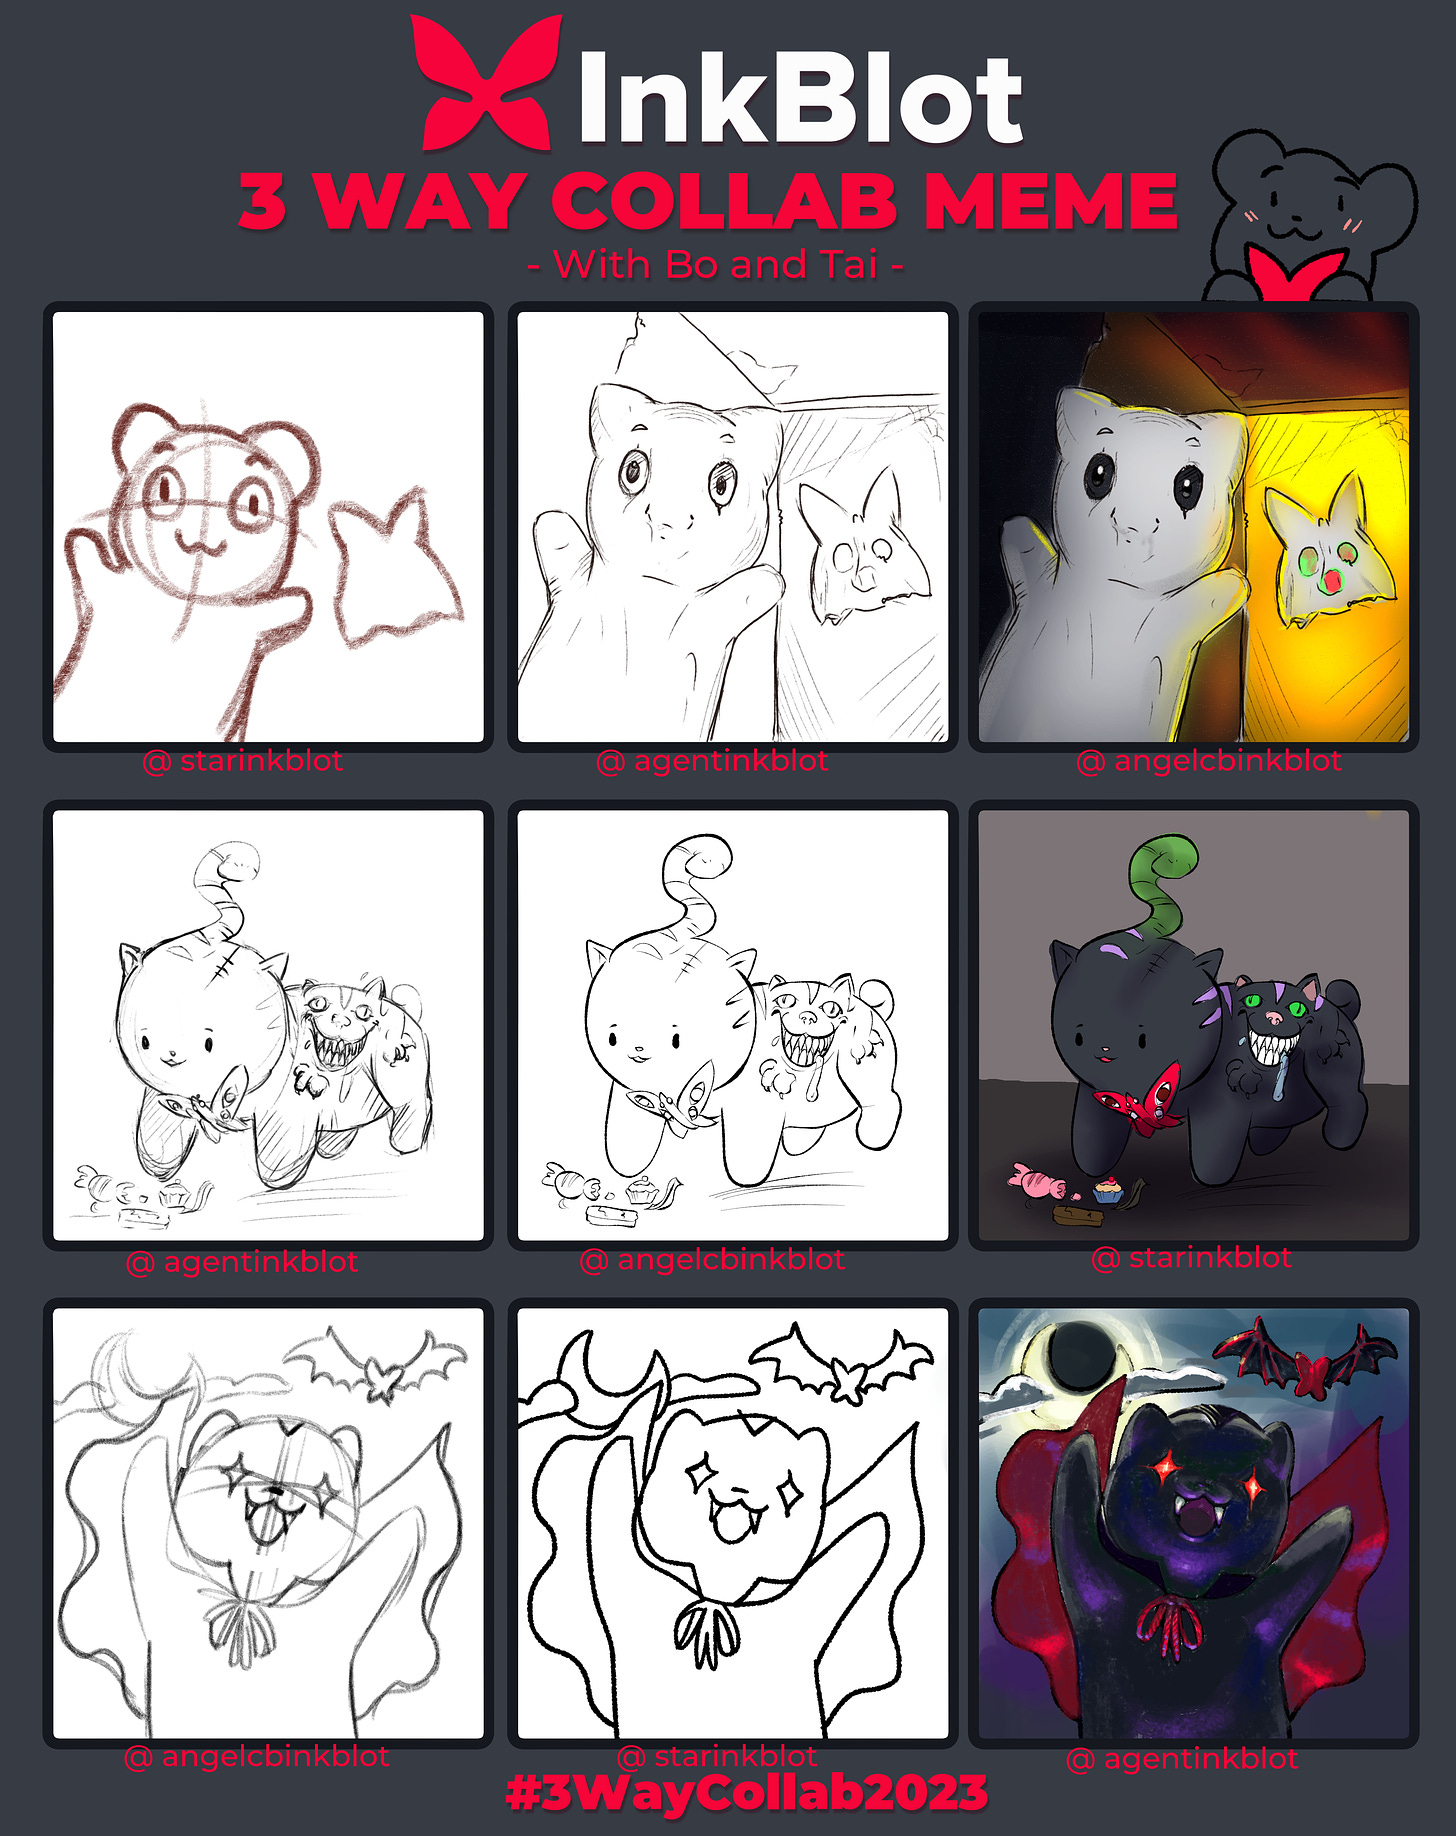 Depicts template for the 3 Way Collab Meme. Shows three rows of three squares depicting a sketch, line art, and colored drawing. The first row is a drawing of Bo and Tai as ghosts. The second row is of a candy eating monster Bo and Tai. The last row is of vampire Bo and Tai.